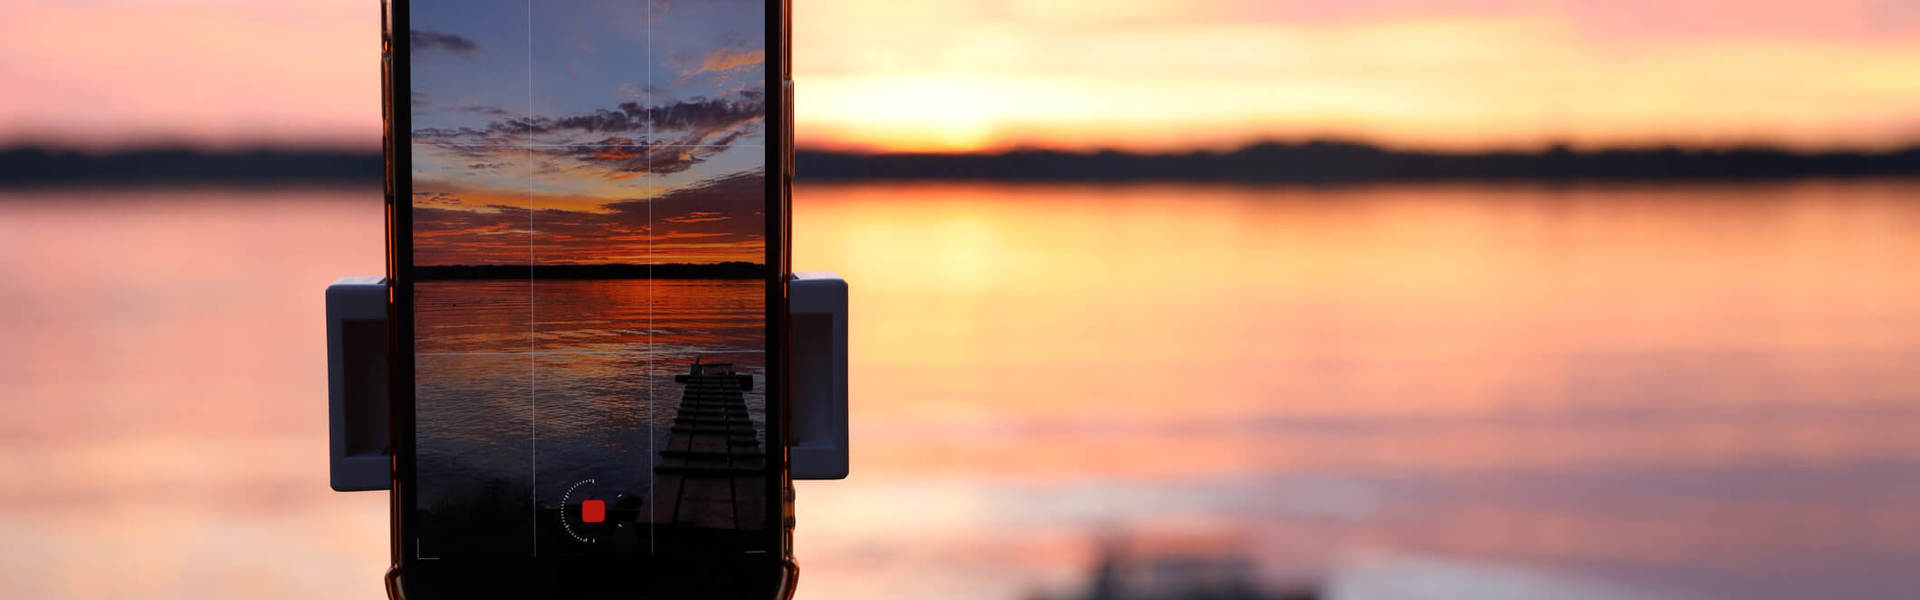 an iphone set up in a tripod capturing a pink and orange sunset horizon